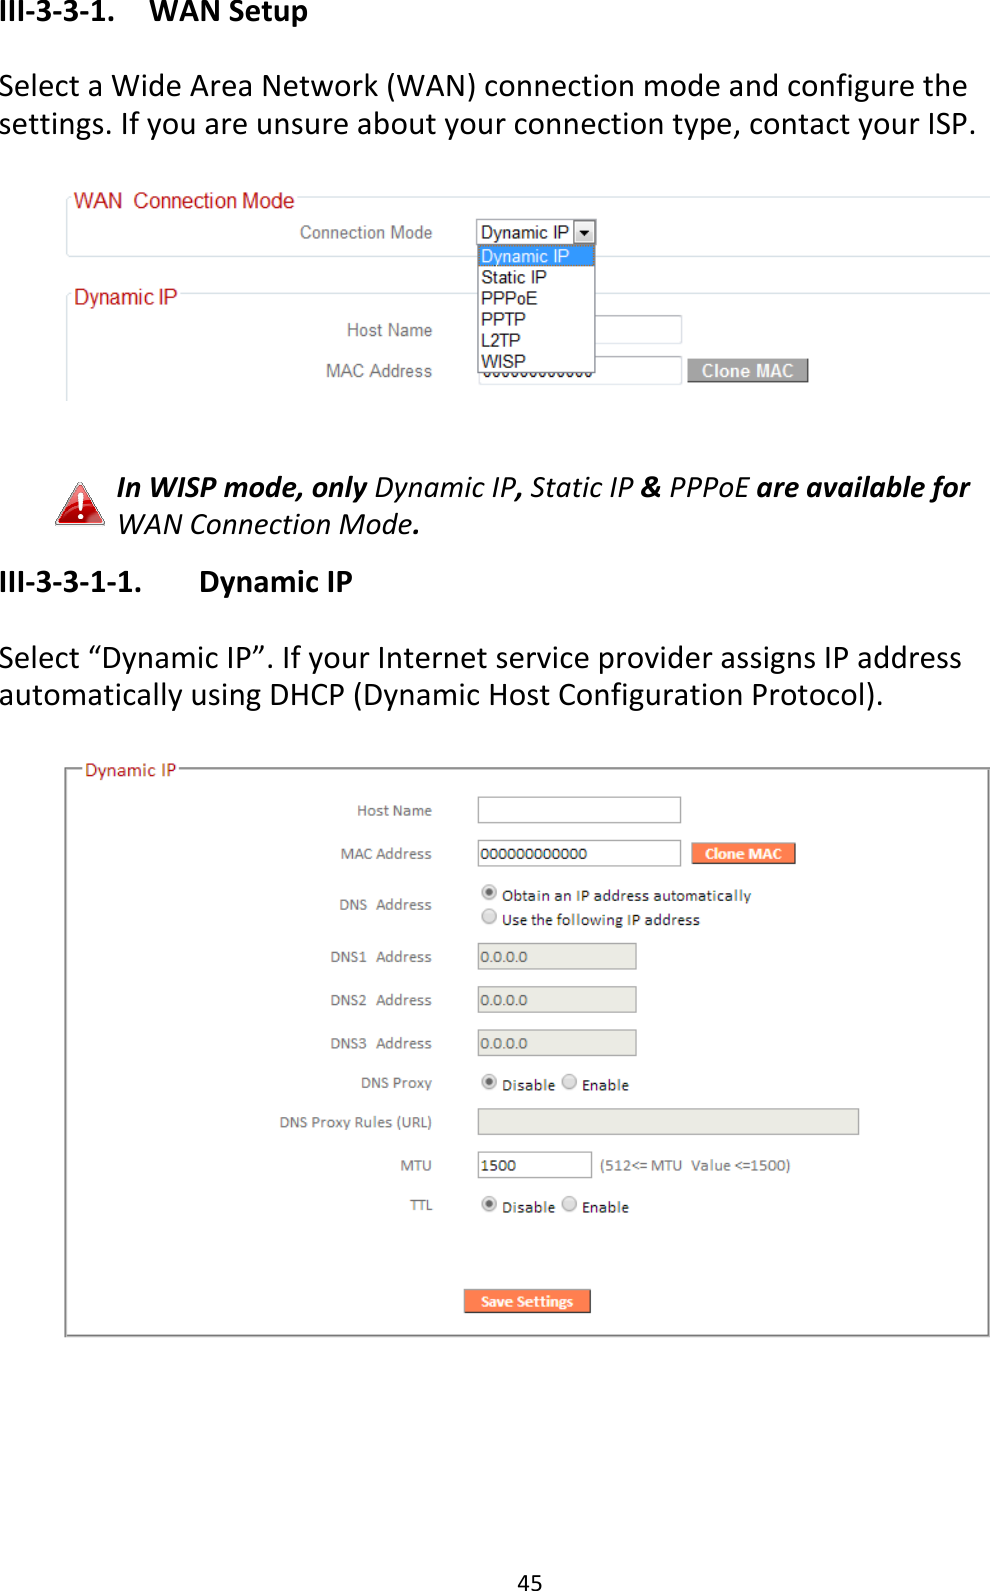 45 III-3-3-1.  WAN Setup  Select a Wide Area Network (WAN) connection mode and configure the settings. If you are unsure about your connection type, contact your ISP.     In WISP mode, only Dynamic IP, Static IP &amp; PPPoE are available for WAN Connection Mode. III-3-3-1-1.    Dynamic IP  Select “Dynamic IP”. If your Internet service provider assigns IP address automatically using DHCP (Dynamic Host Configuration Protocol).   